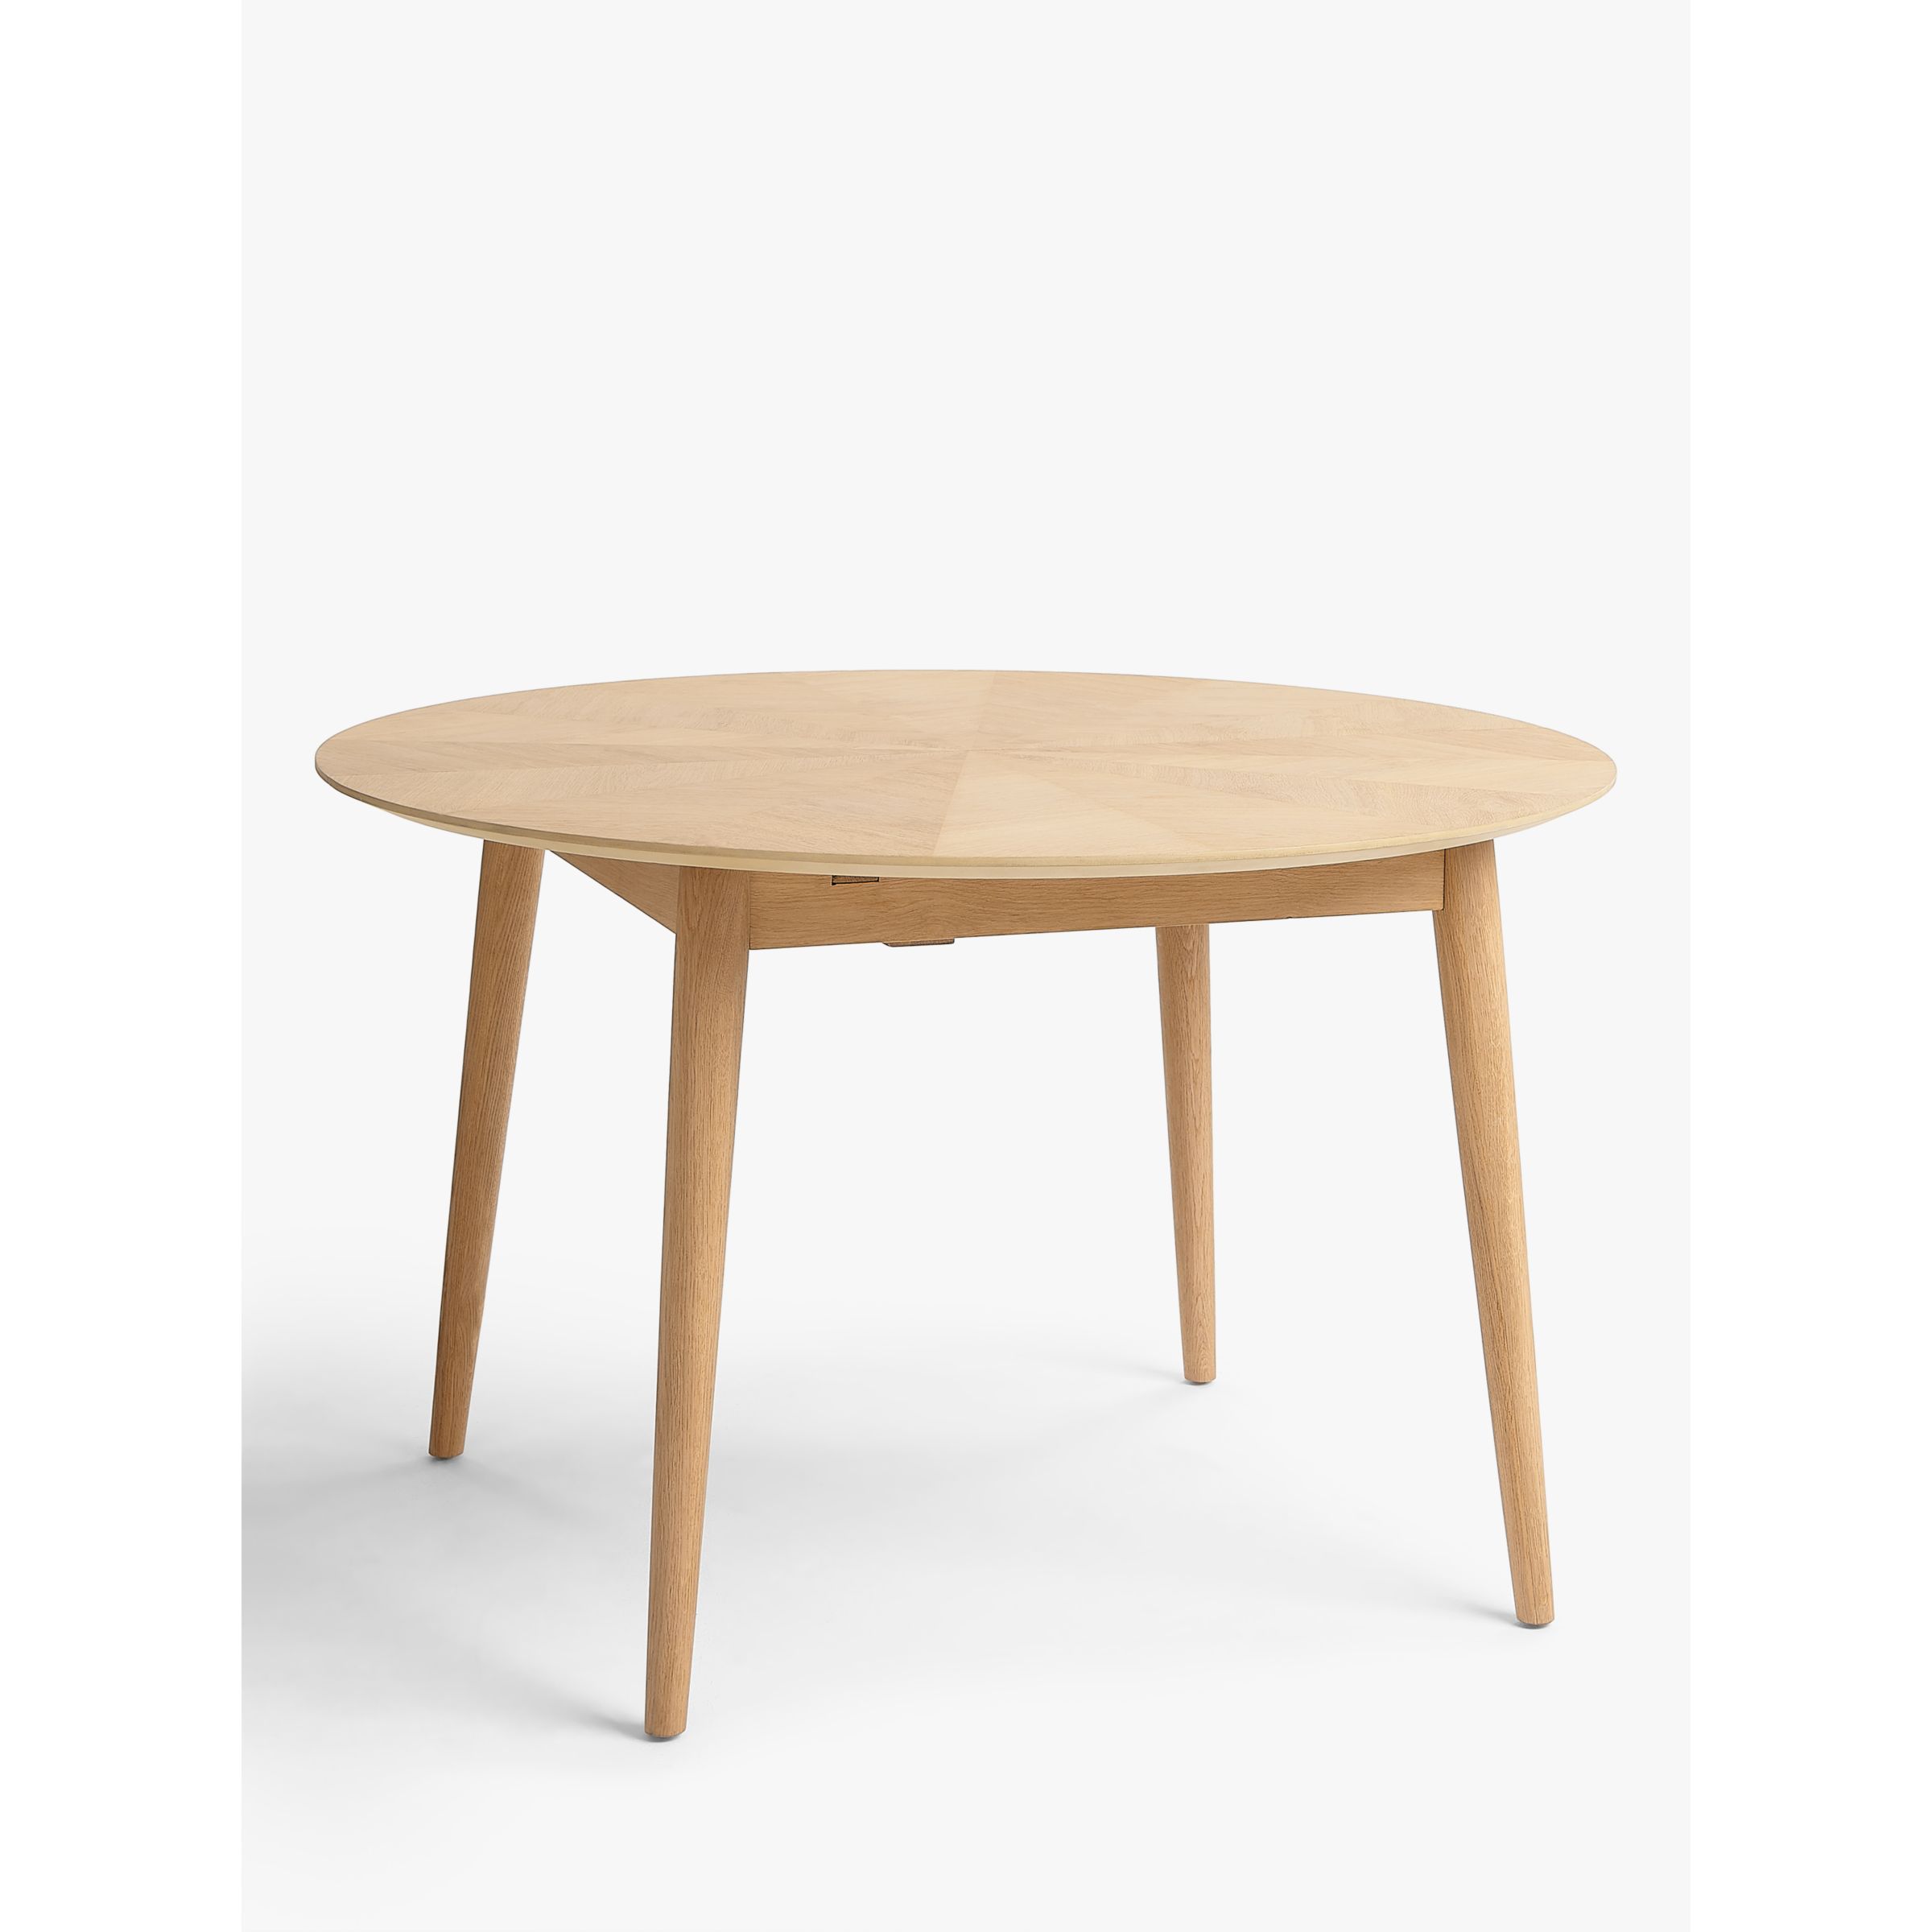 John Lewis Iona 4-6 Seater Extending Round Dining Table